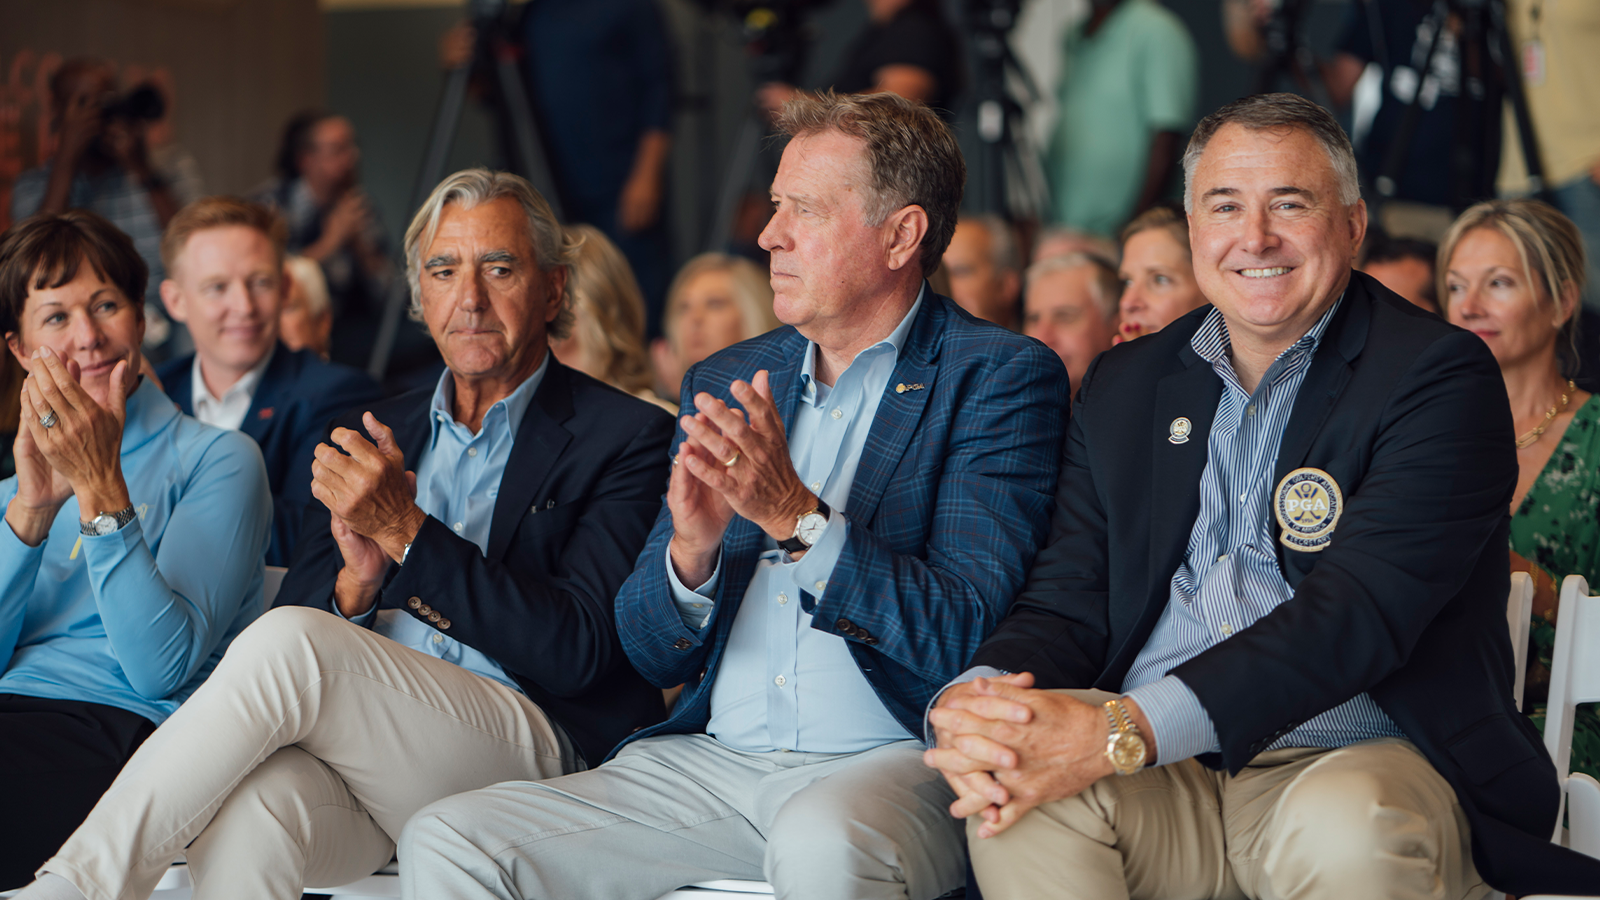 PGA of America Past President Suzy Whaley, PGA of America CEO Seth Waugh, PGA of America President, John Lindert and PGA of America Vice President Don Rea Jr. during the Welcome Home Celebration at PGA Frisco Campus on August 22, 2022 in Frisco, Texas. (Photo by Daryl Johnson/PGA of America)